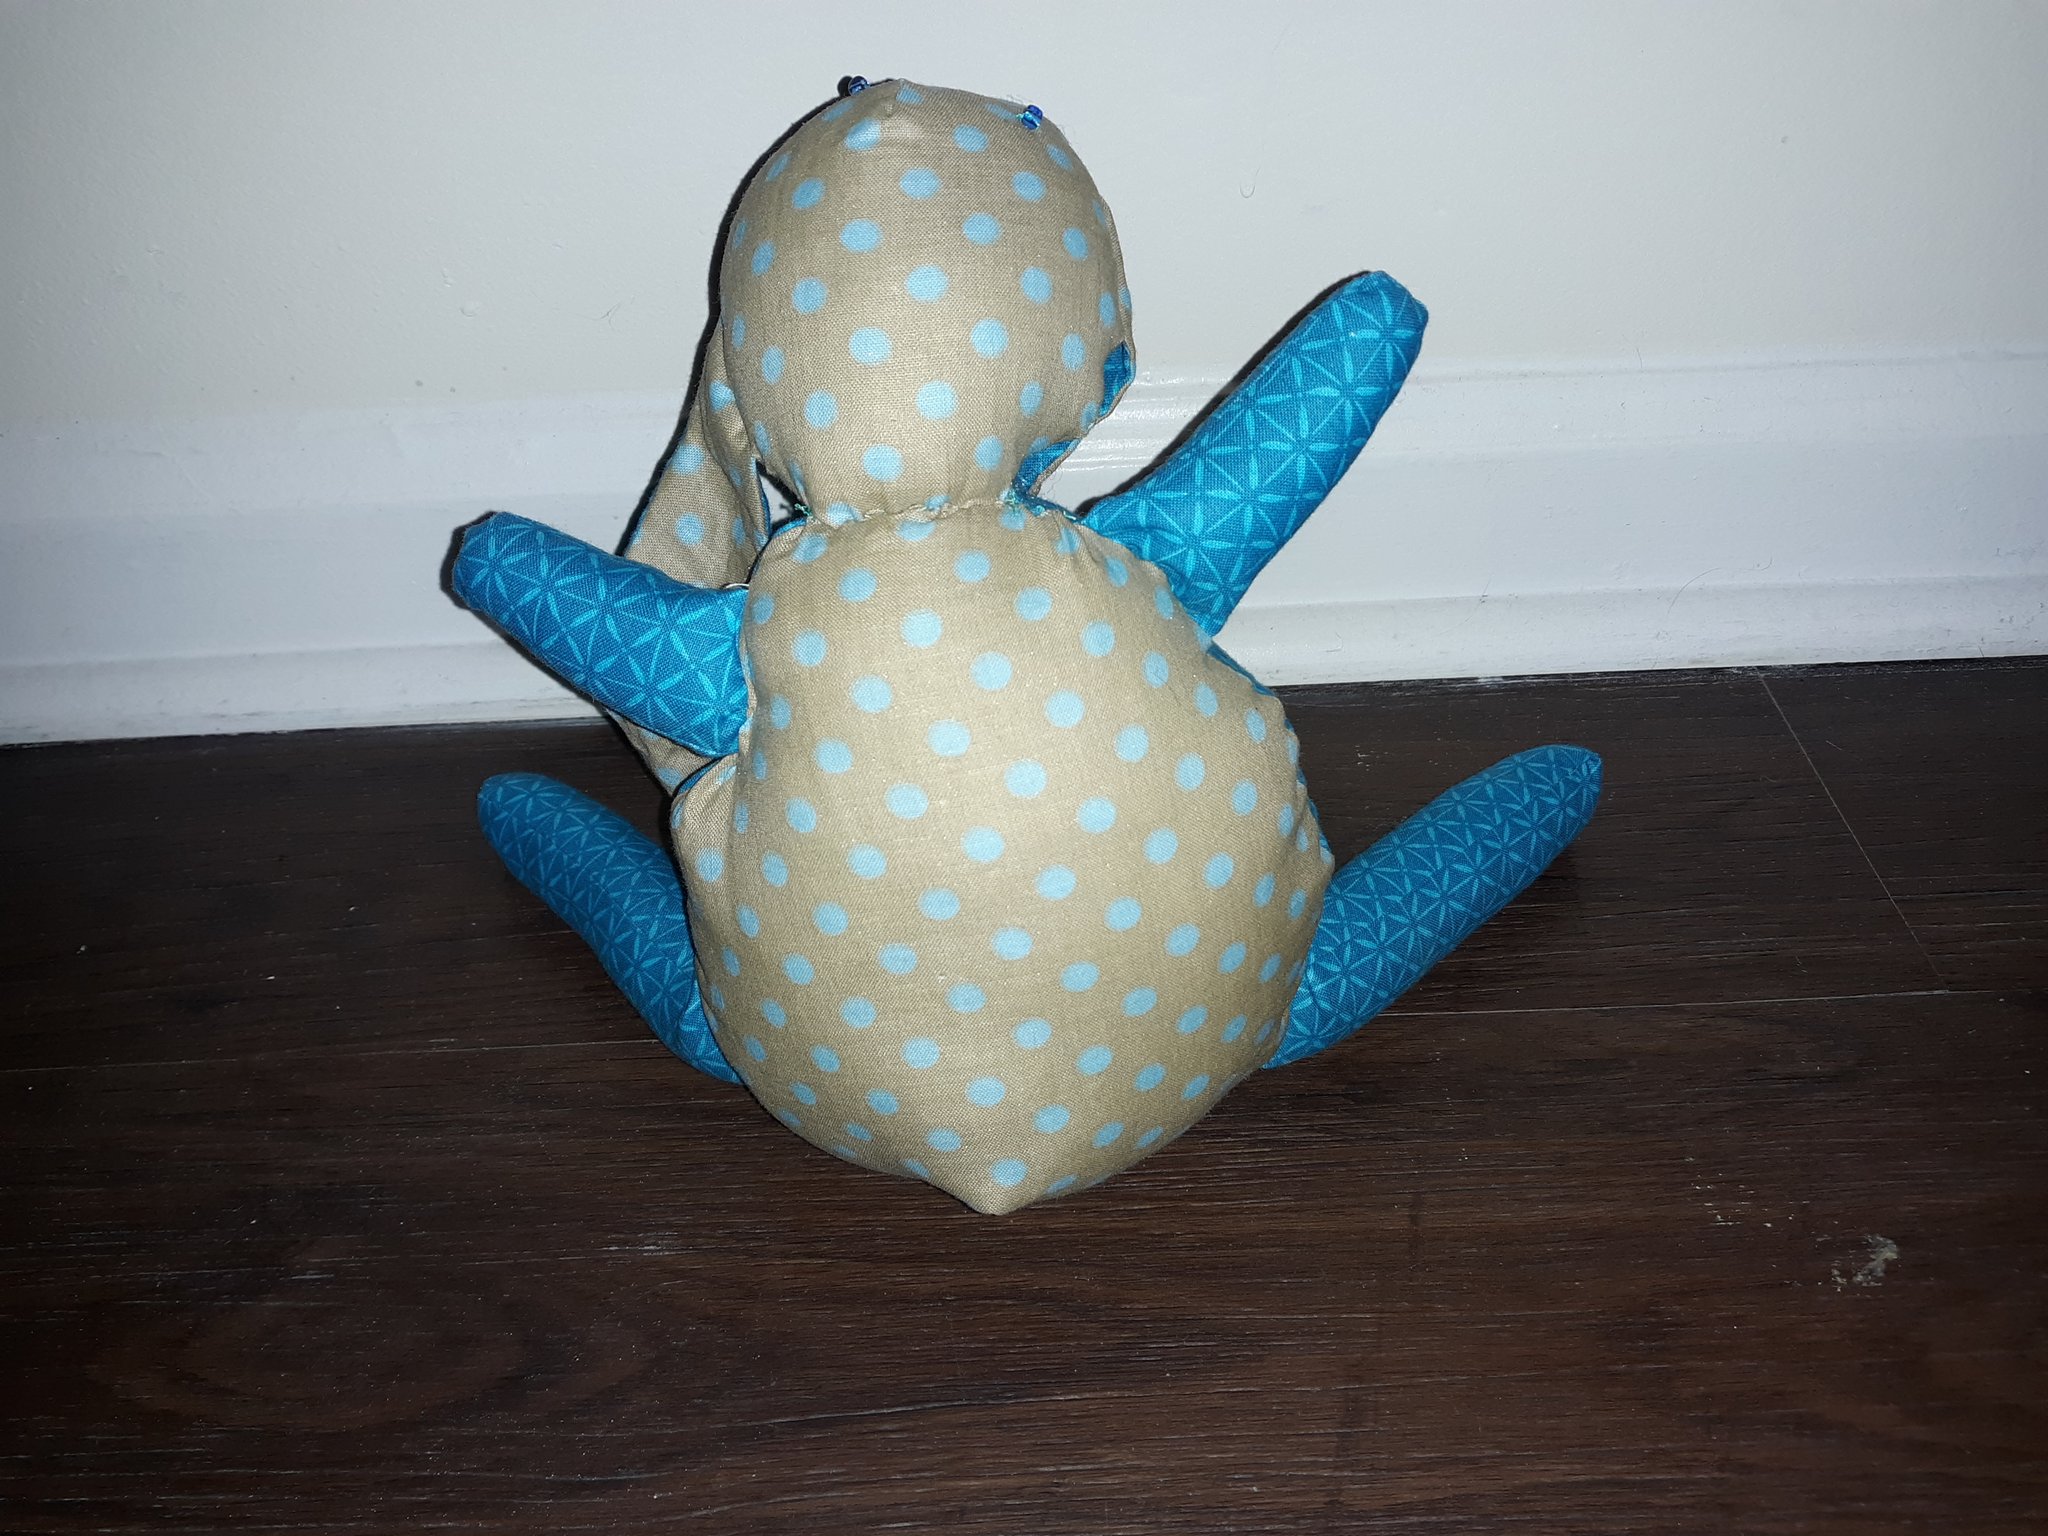 The back of the doll. The back of the body is made of the beige and light blue polka dotted fabric.